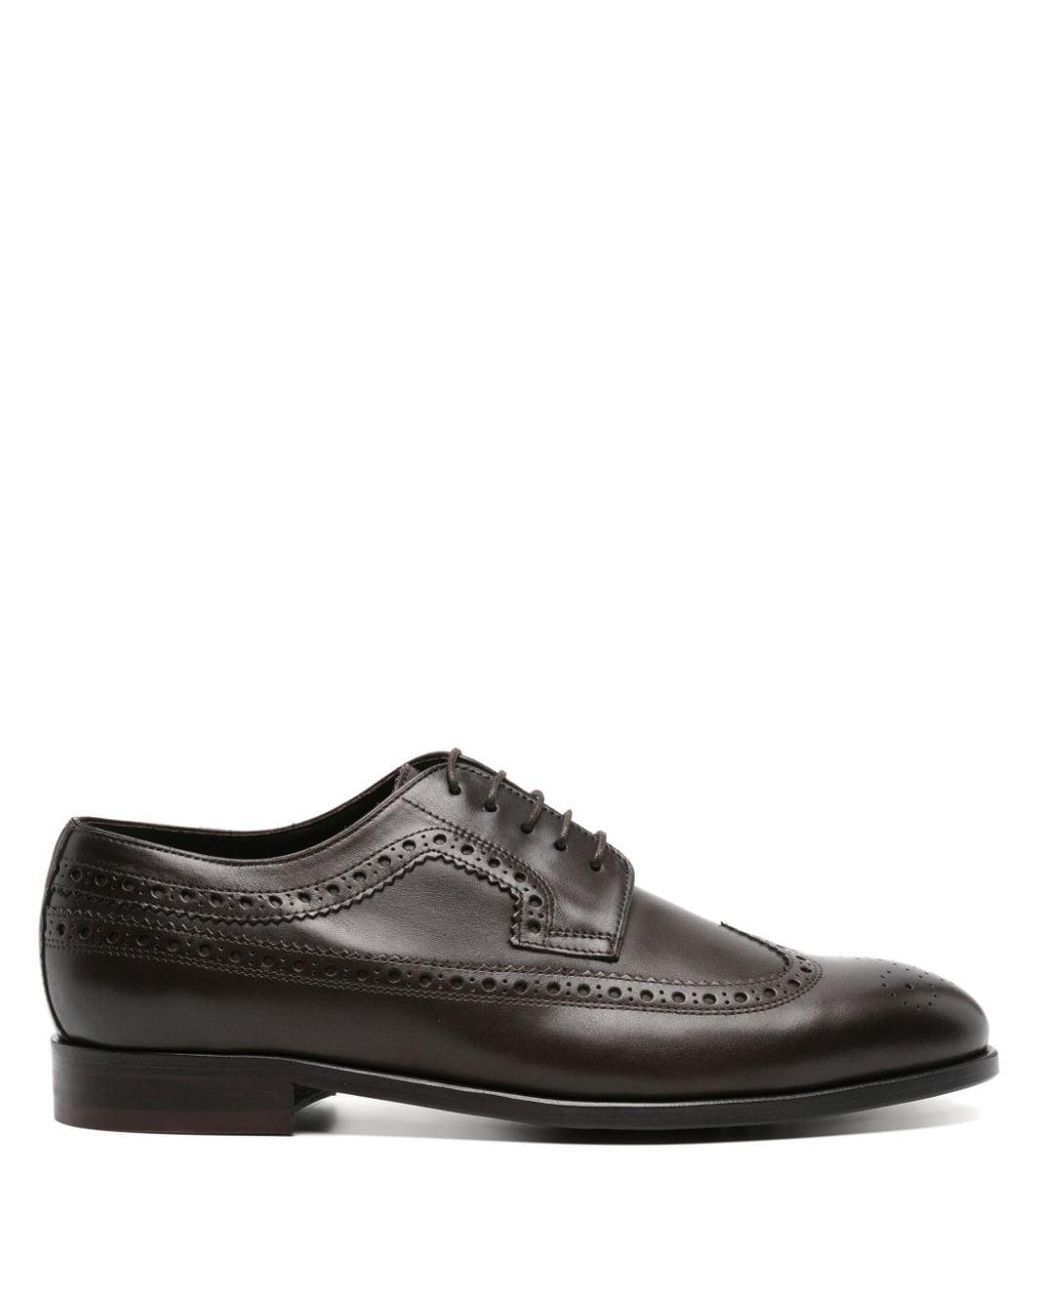 Womens Genuine Leather Brogue Boys Dress Shoes With Lace Up Flat Heels,  Round Toe, Patent Black Oxford, Casual And Big Size 45 230823 From Hu06,  $41.16 | DHgate.Com